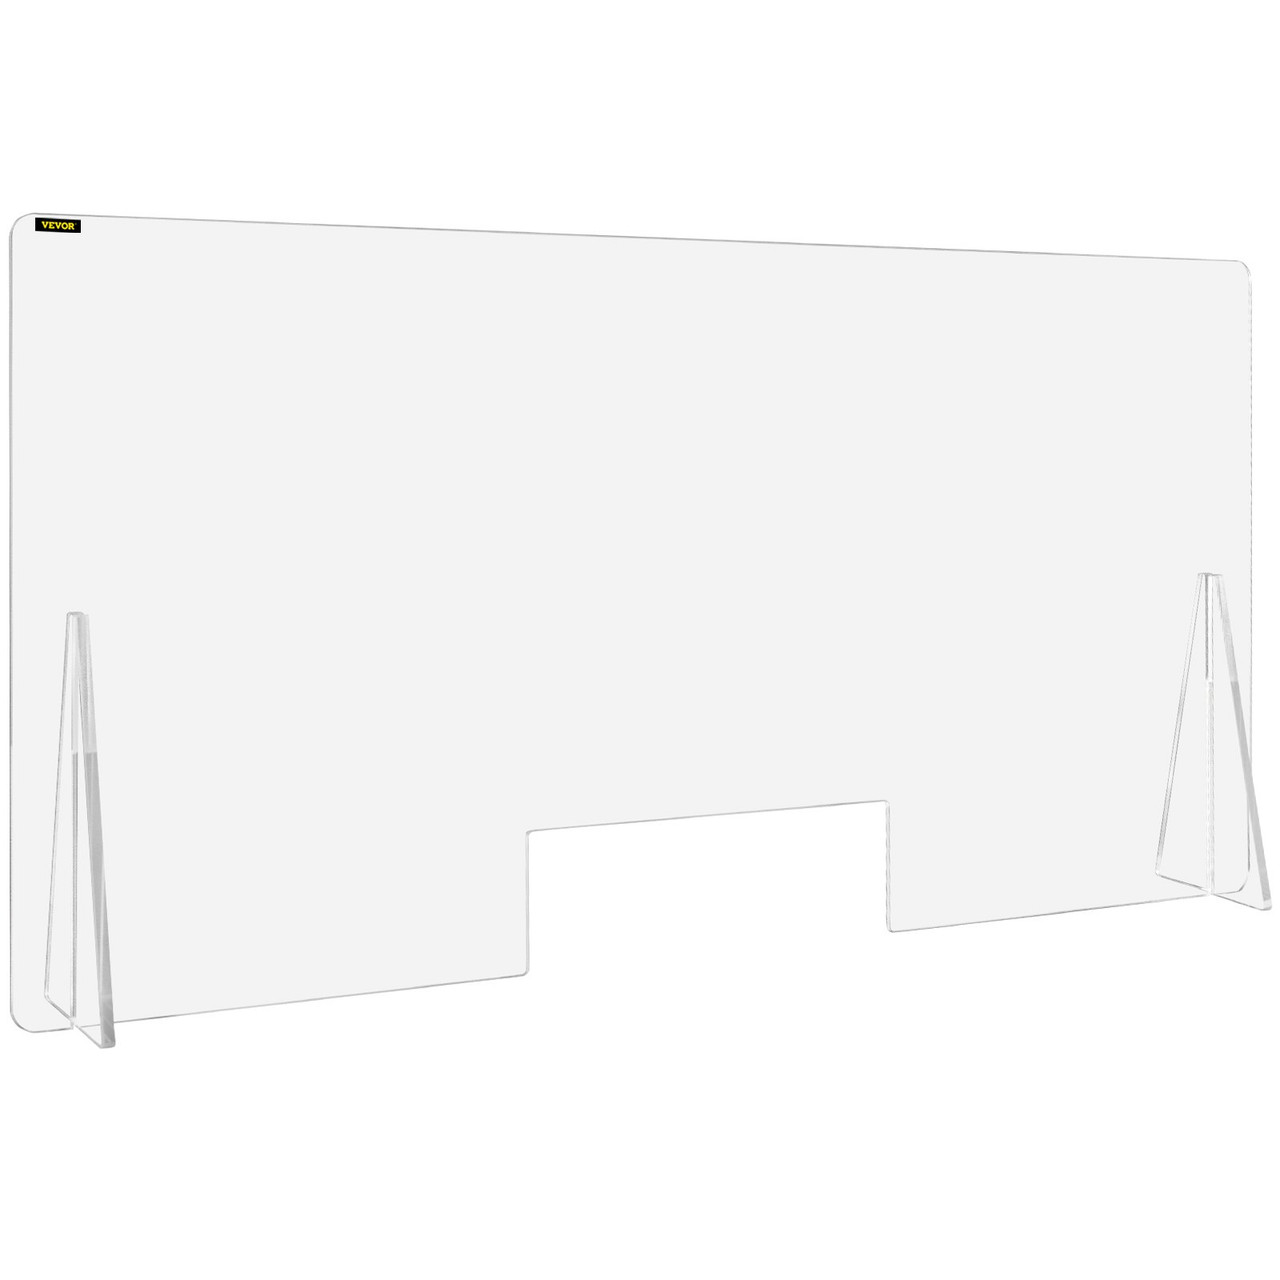 Sneeze Guard for Counter 24"x48" Acrylic Shield for Desk 0.2" Thick Acrylic Board Acrylic Shield for Counter with Transaction Window Acrylic Sneeze Guard for Cashier Counters, Banks, Restaurants